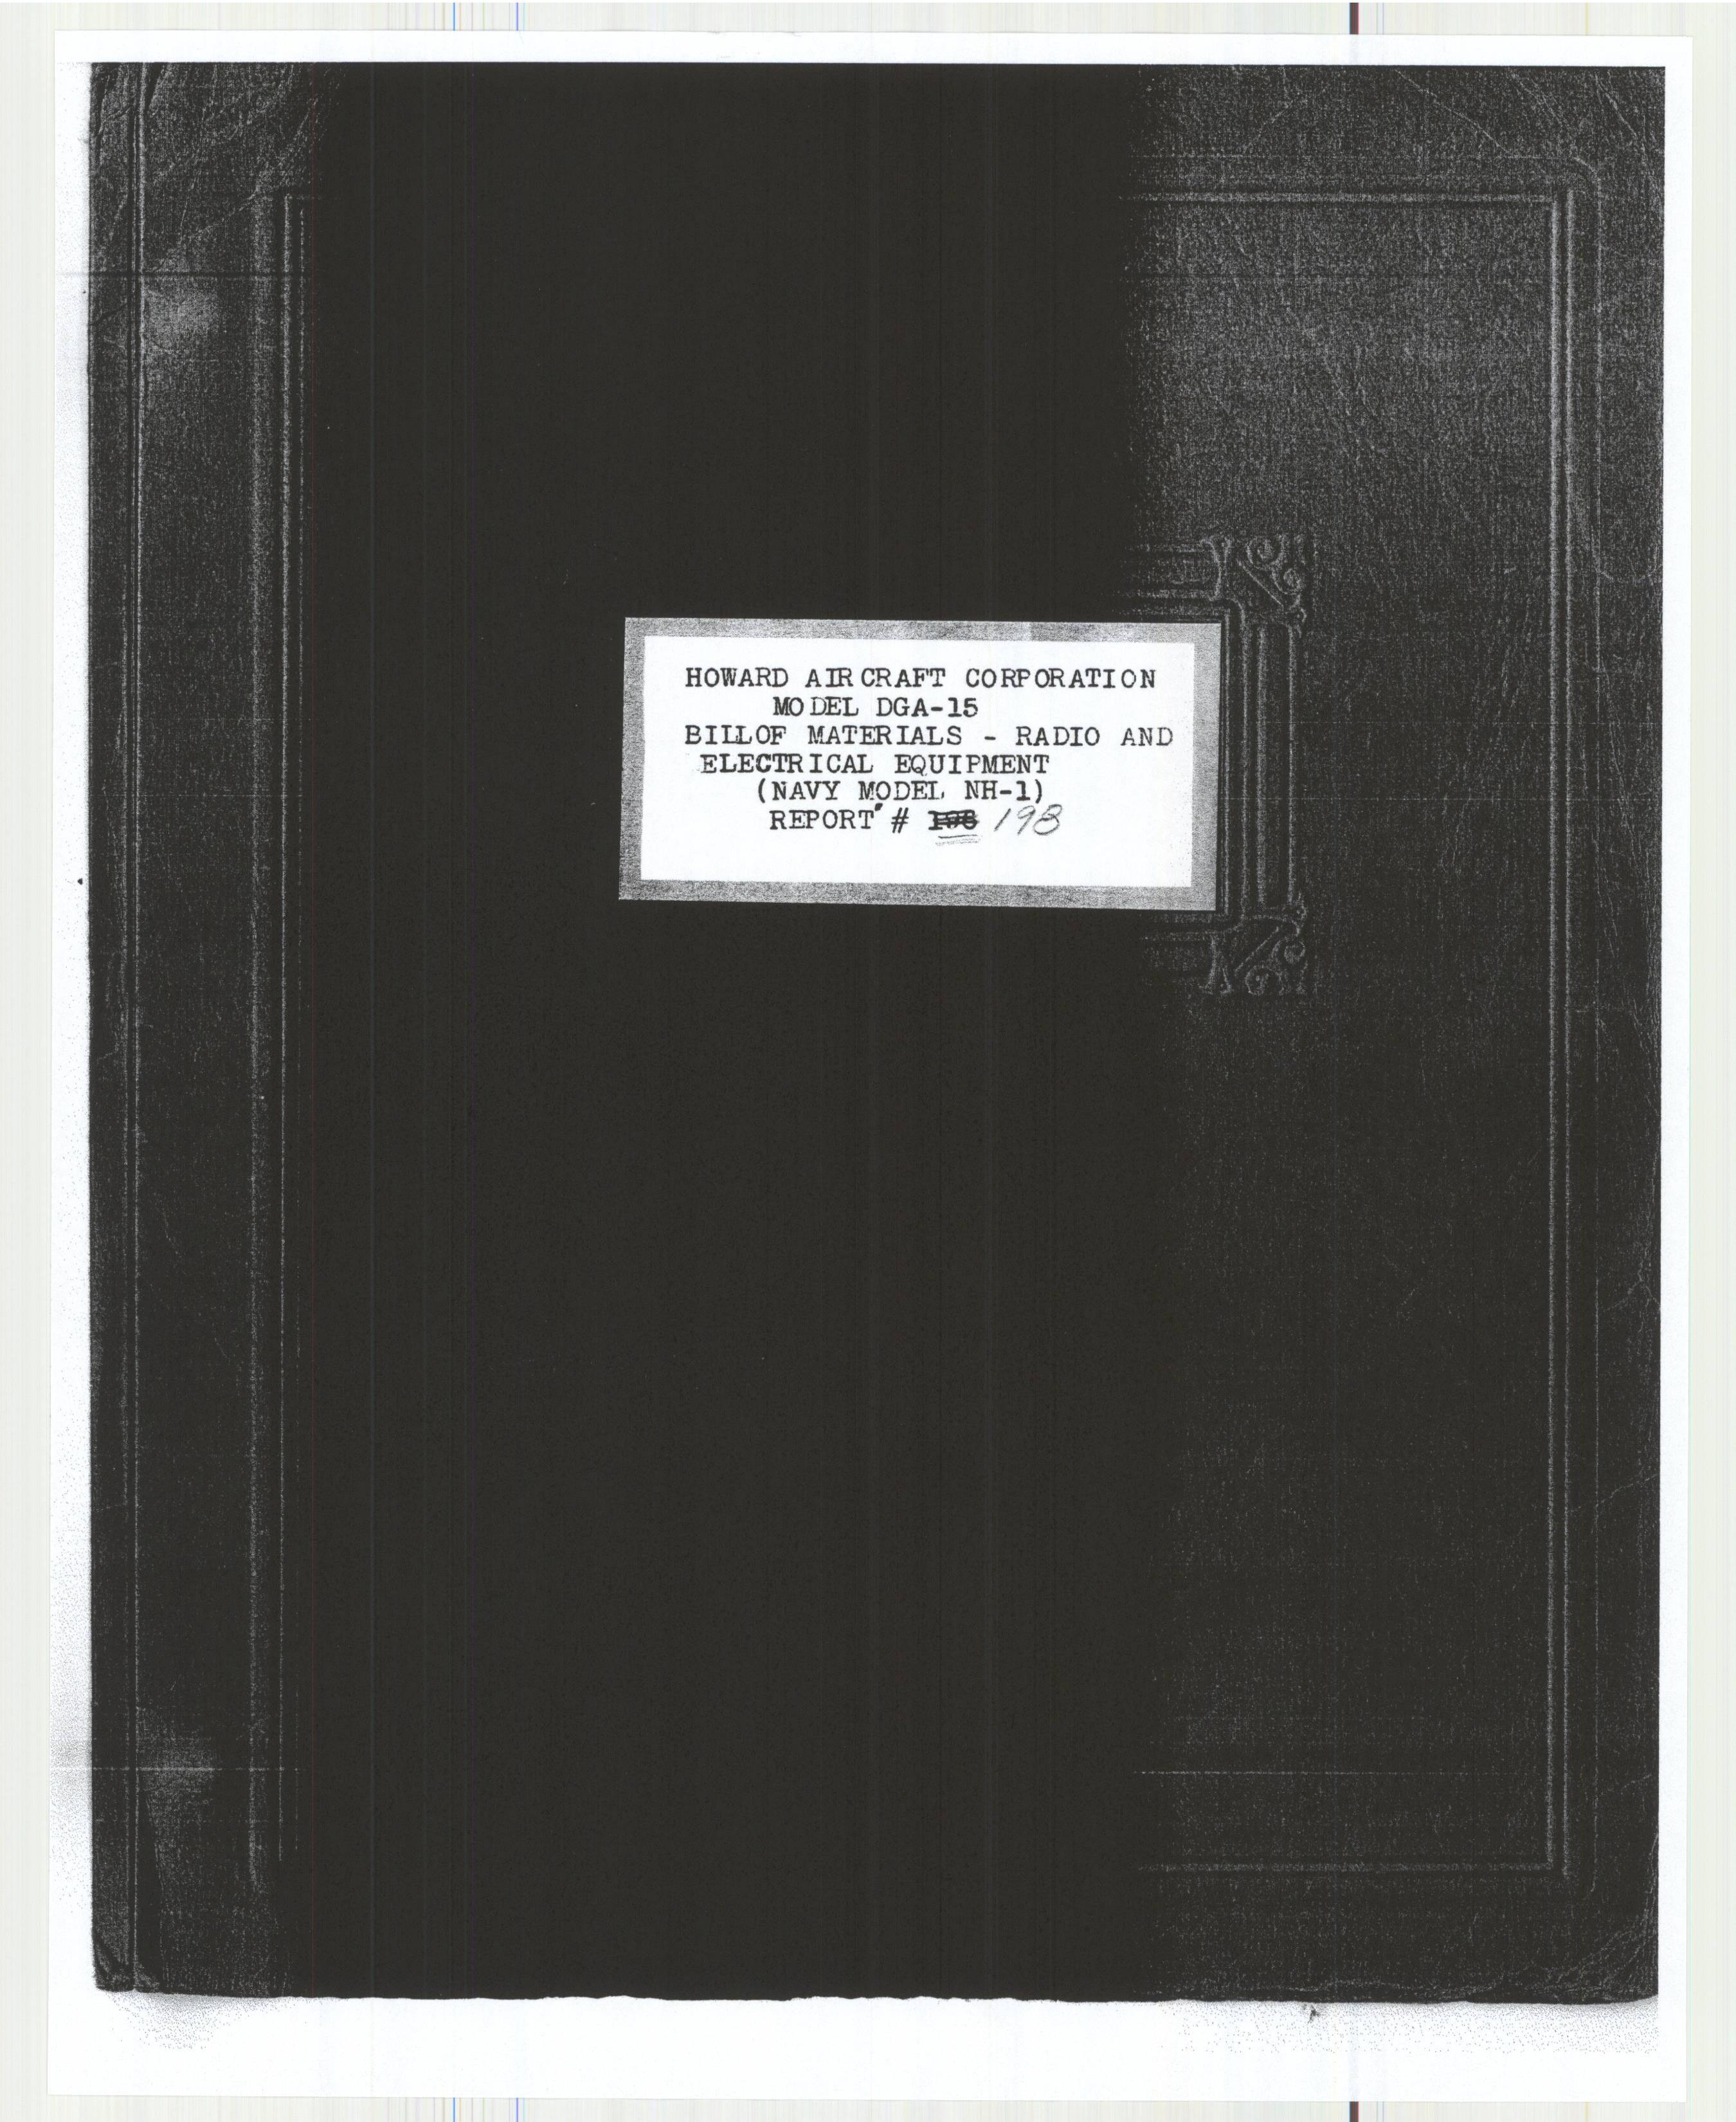 Sample page 1 from AirCorps Library document: Report 198, Bill of Materials, Radio and Electrical Equipment, DGA-15